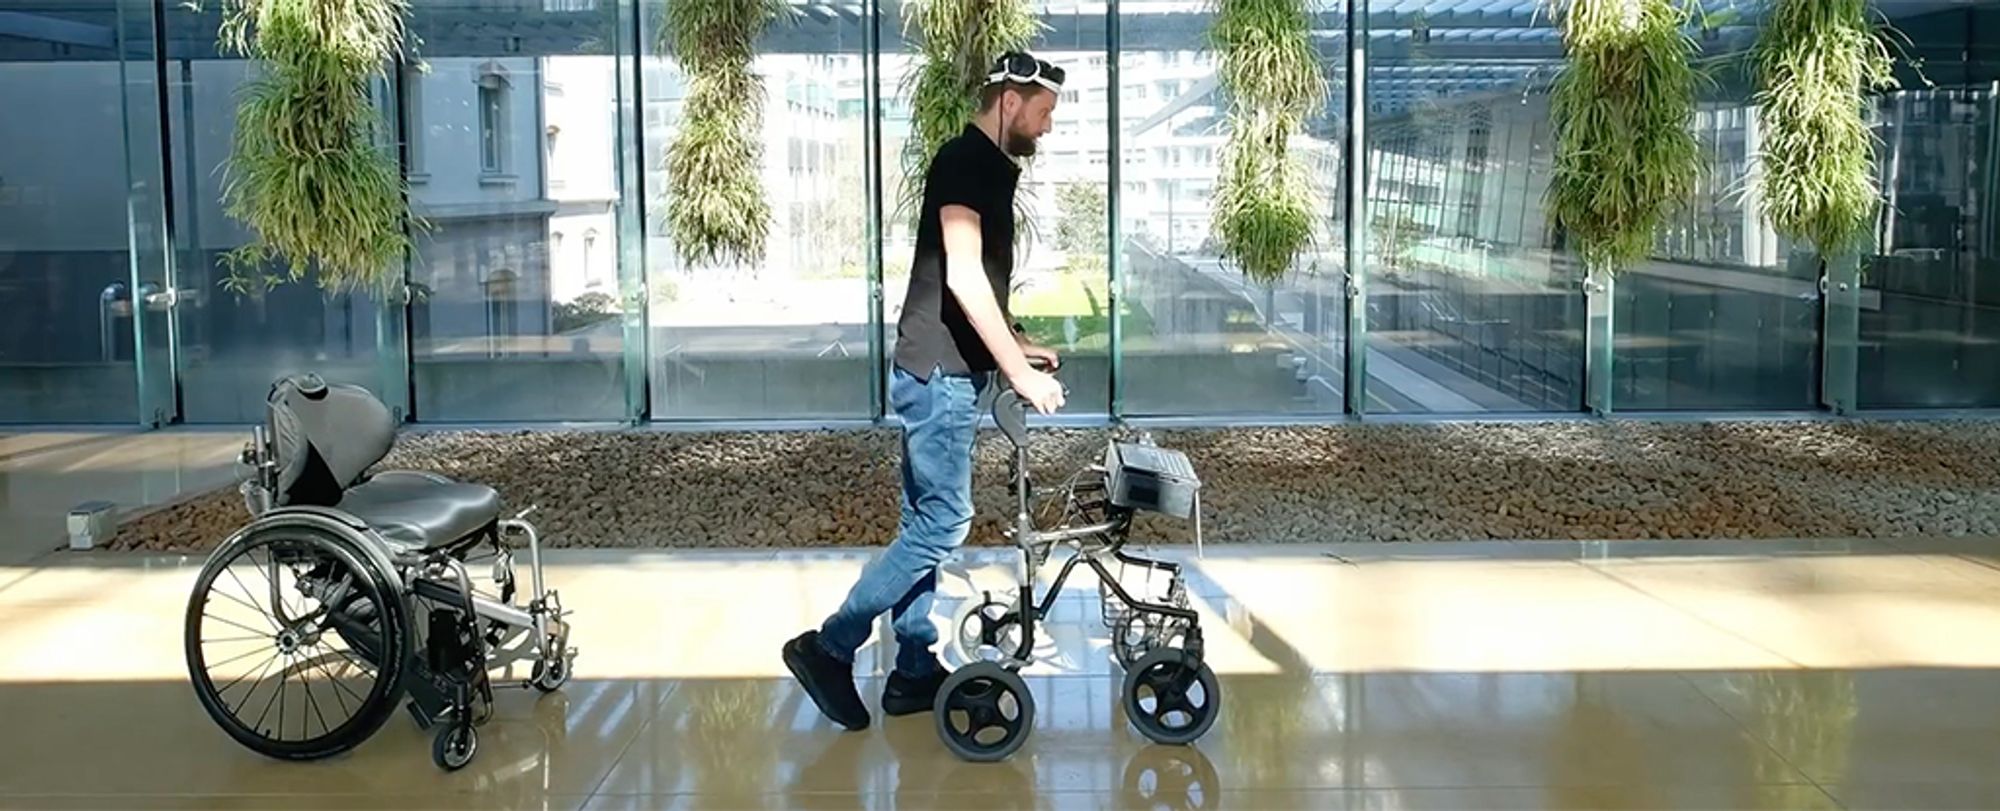 Brain And Spine Implants Restore Movement in a Man Paralyzed by an Accident